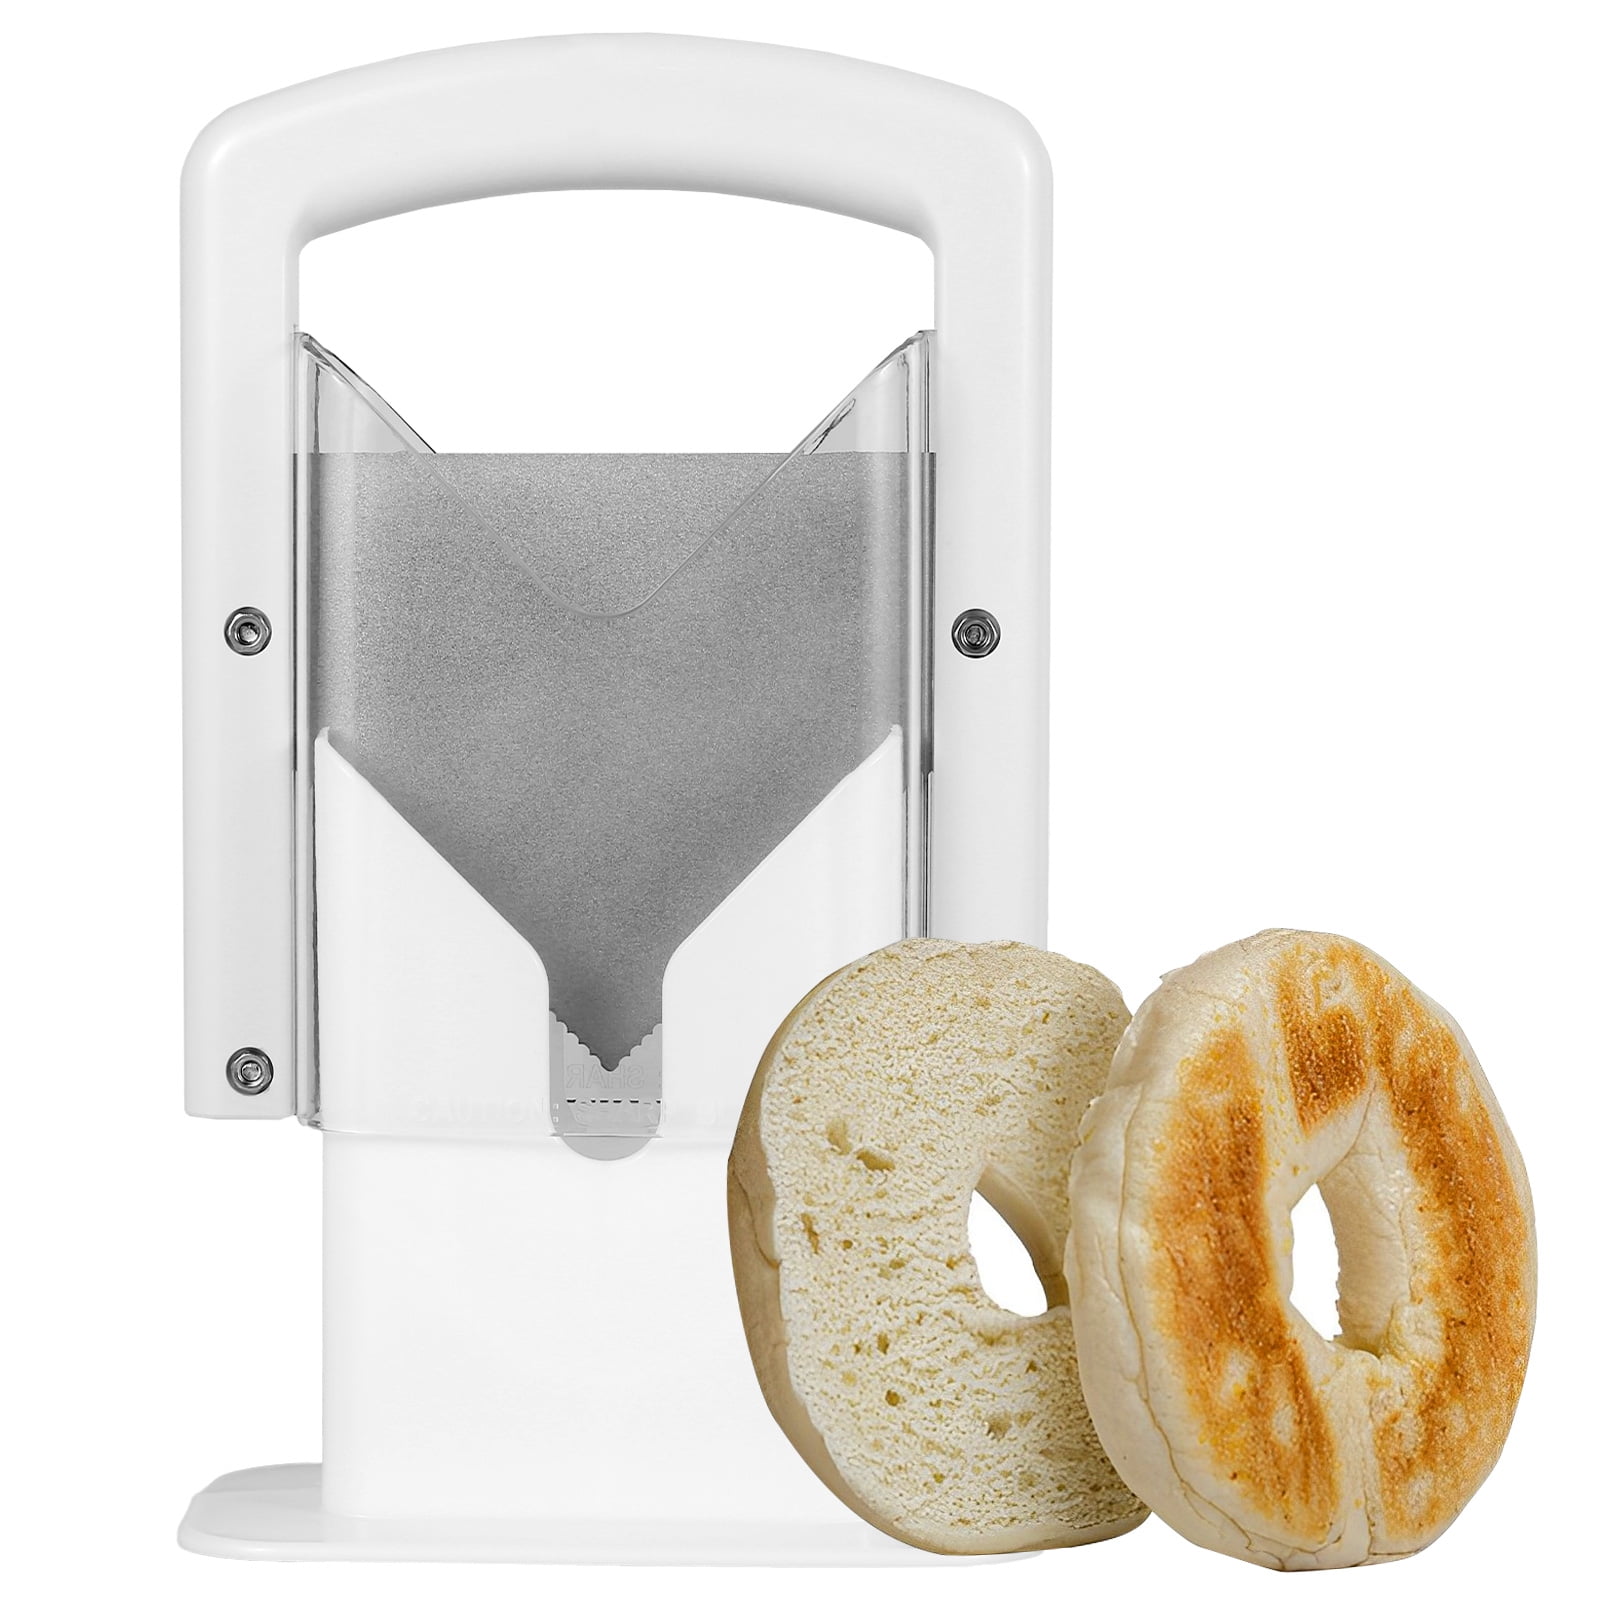 Popeil Clear Hard Plastic Bagel English Muffin Slicer Cutter, New